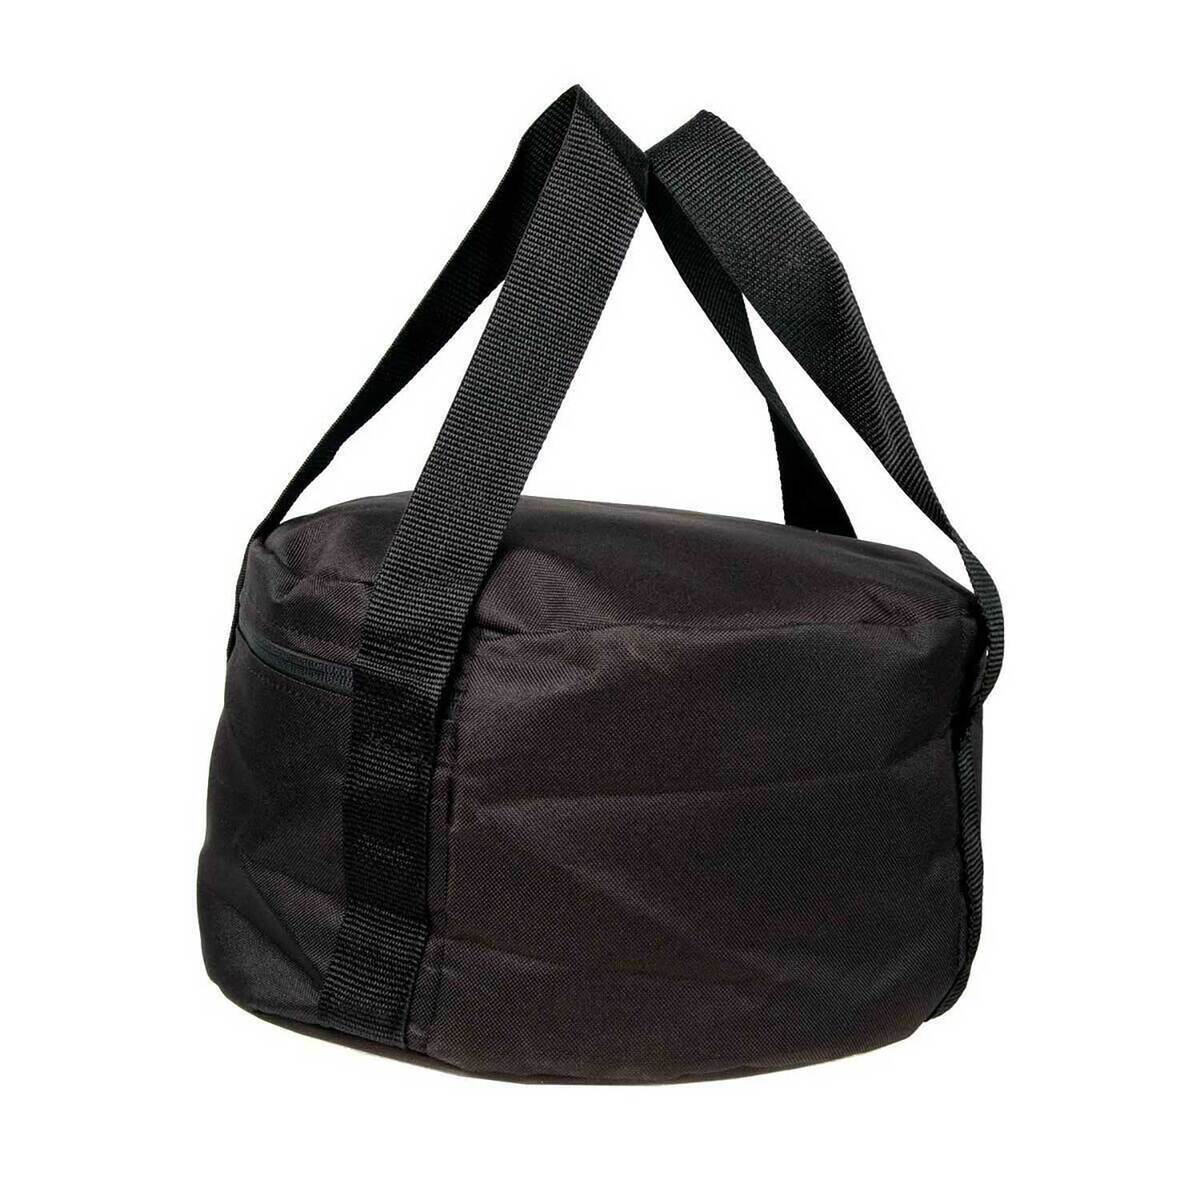 Canvas Carry Bag for 12-inch Dutch Oven DO-32BK